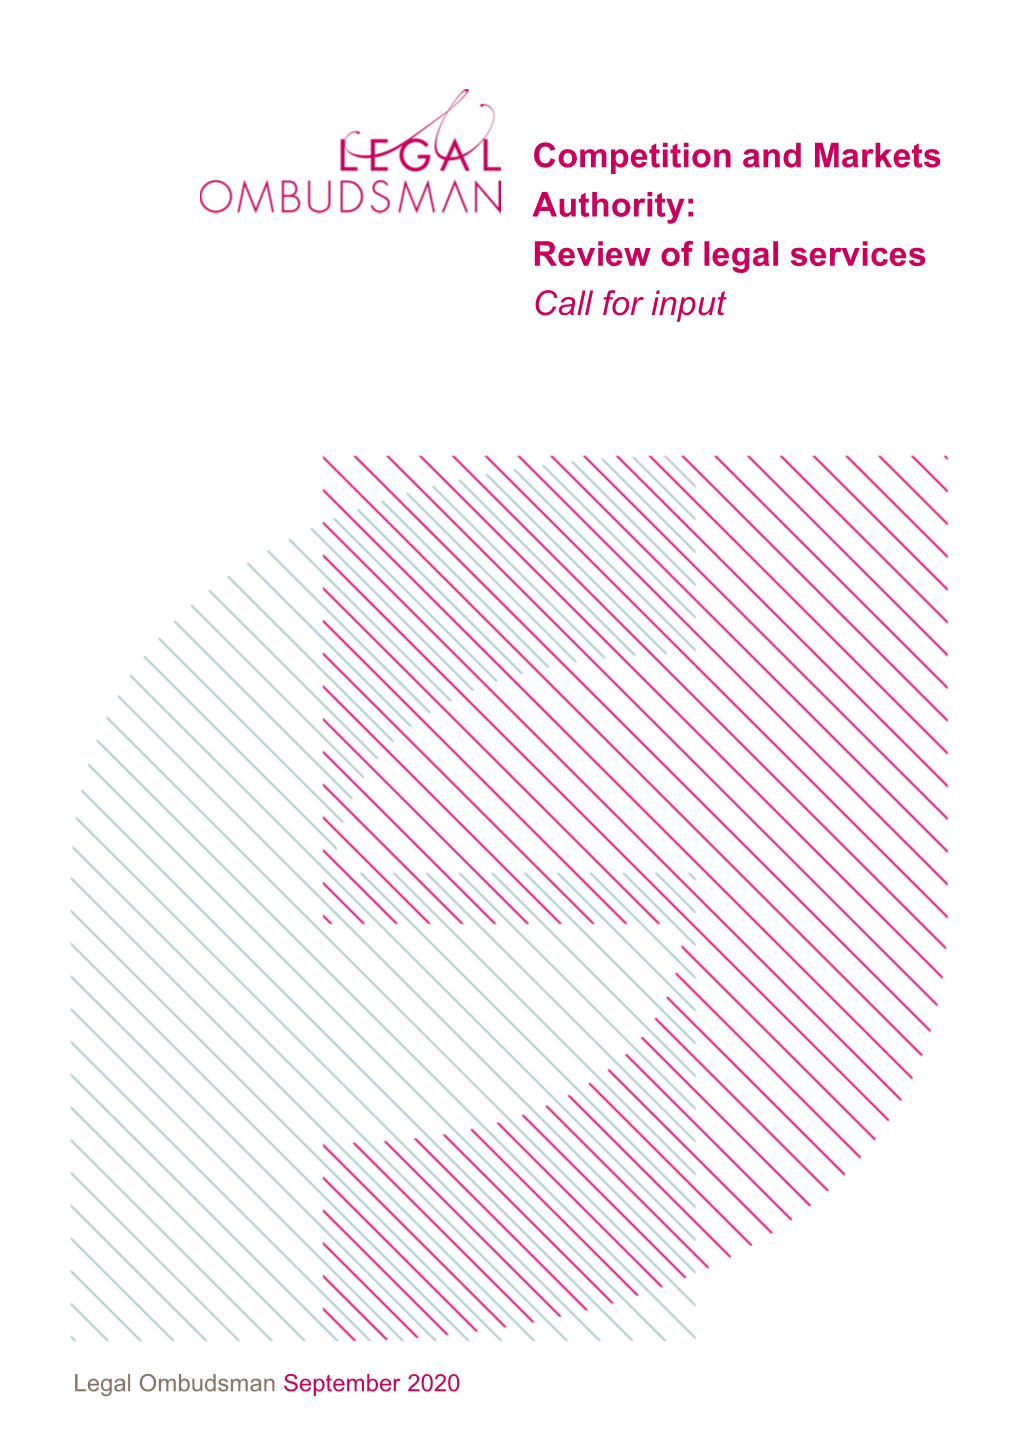 Competition and Markets Authority: Review of Legal Services Call for Input